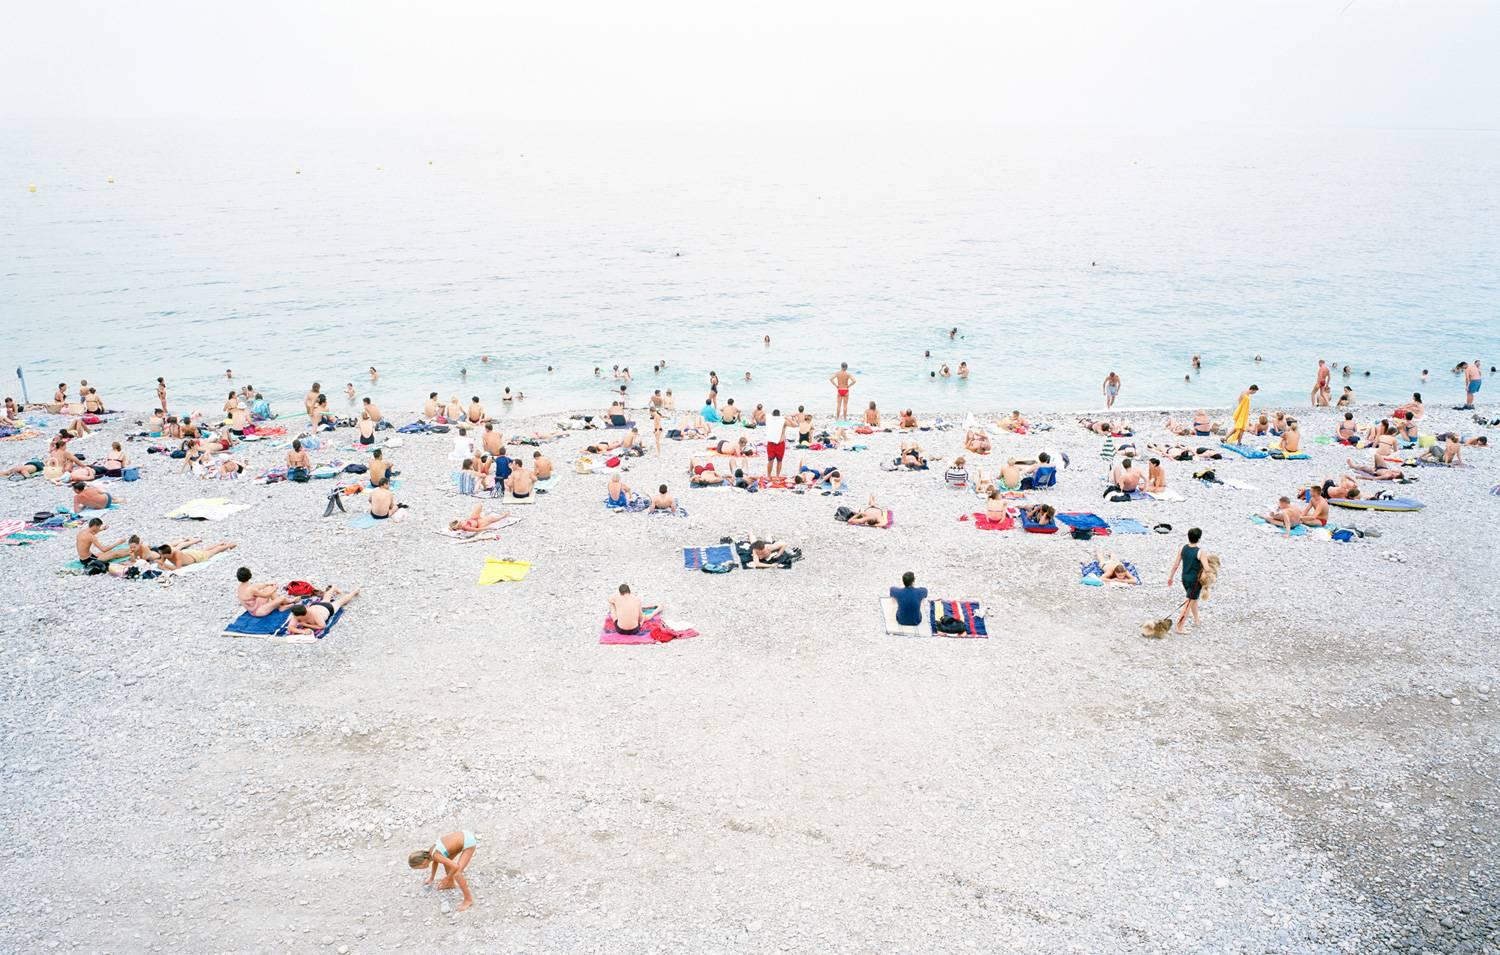 Frank Schott Color Photograph - Nizza - large format photograph of summer beach scene in South of France